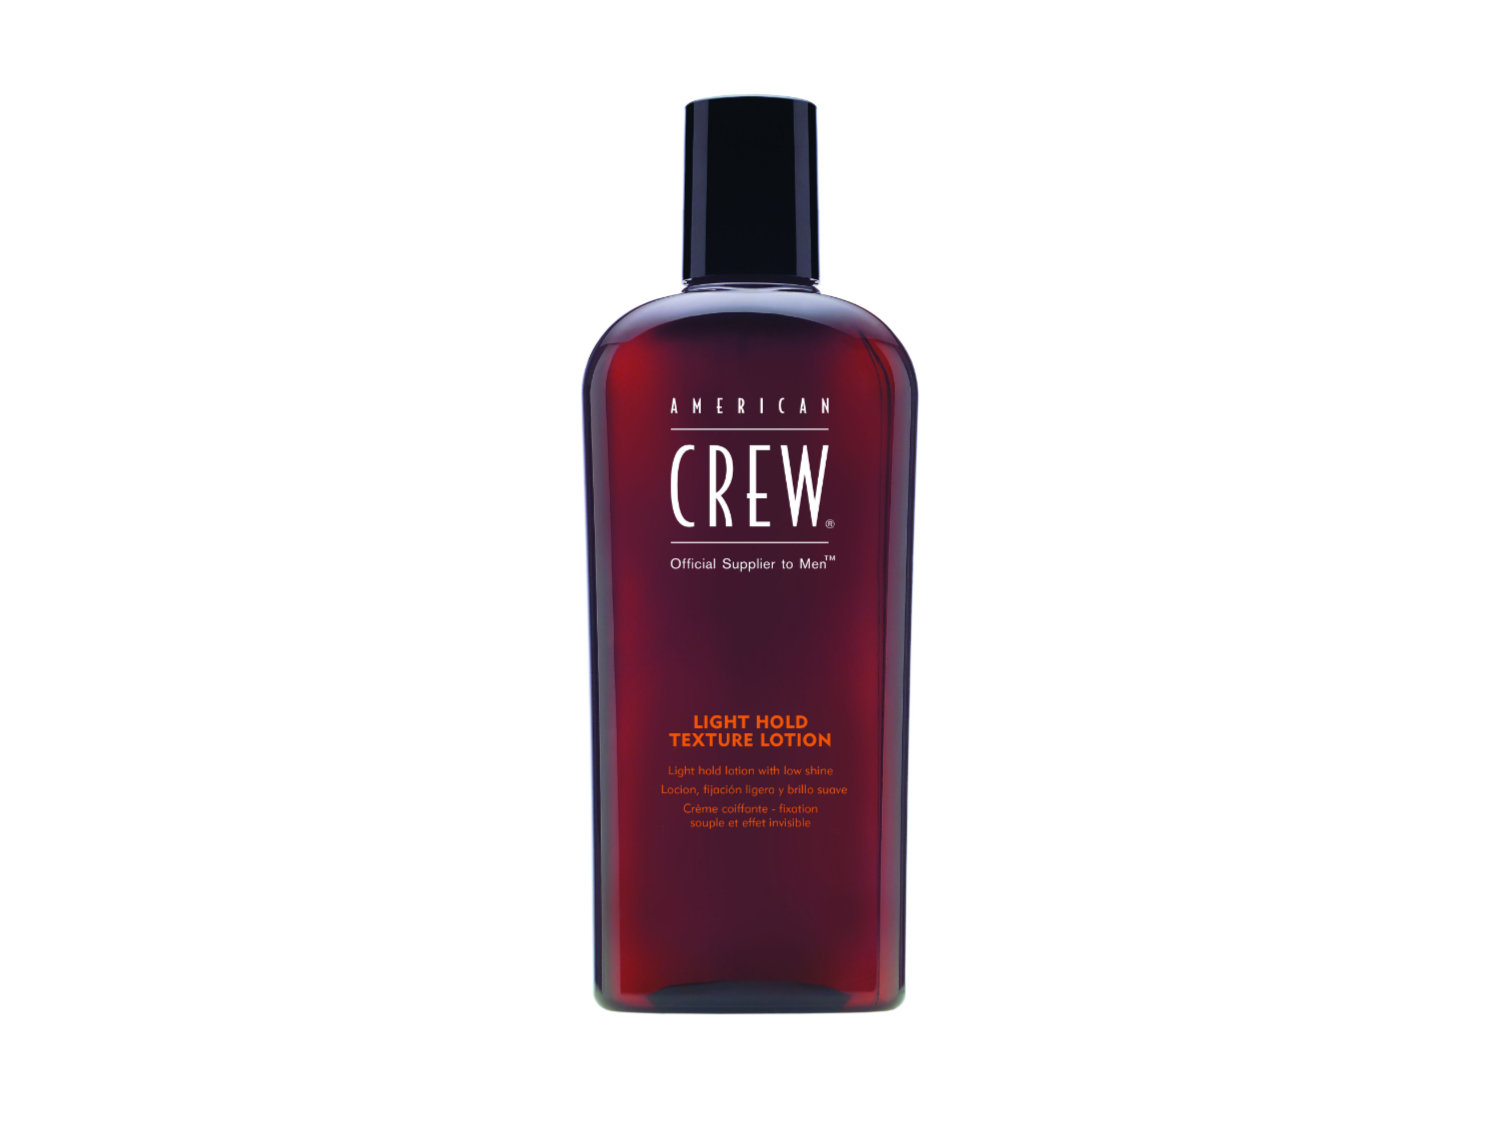 Arma Beauty - American Crew - Light Hold Texture Lotion